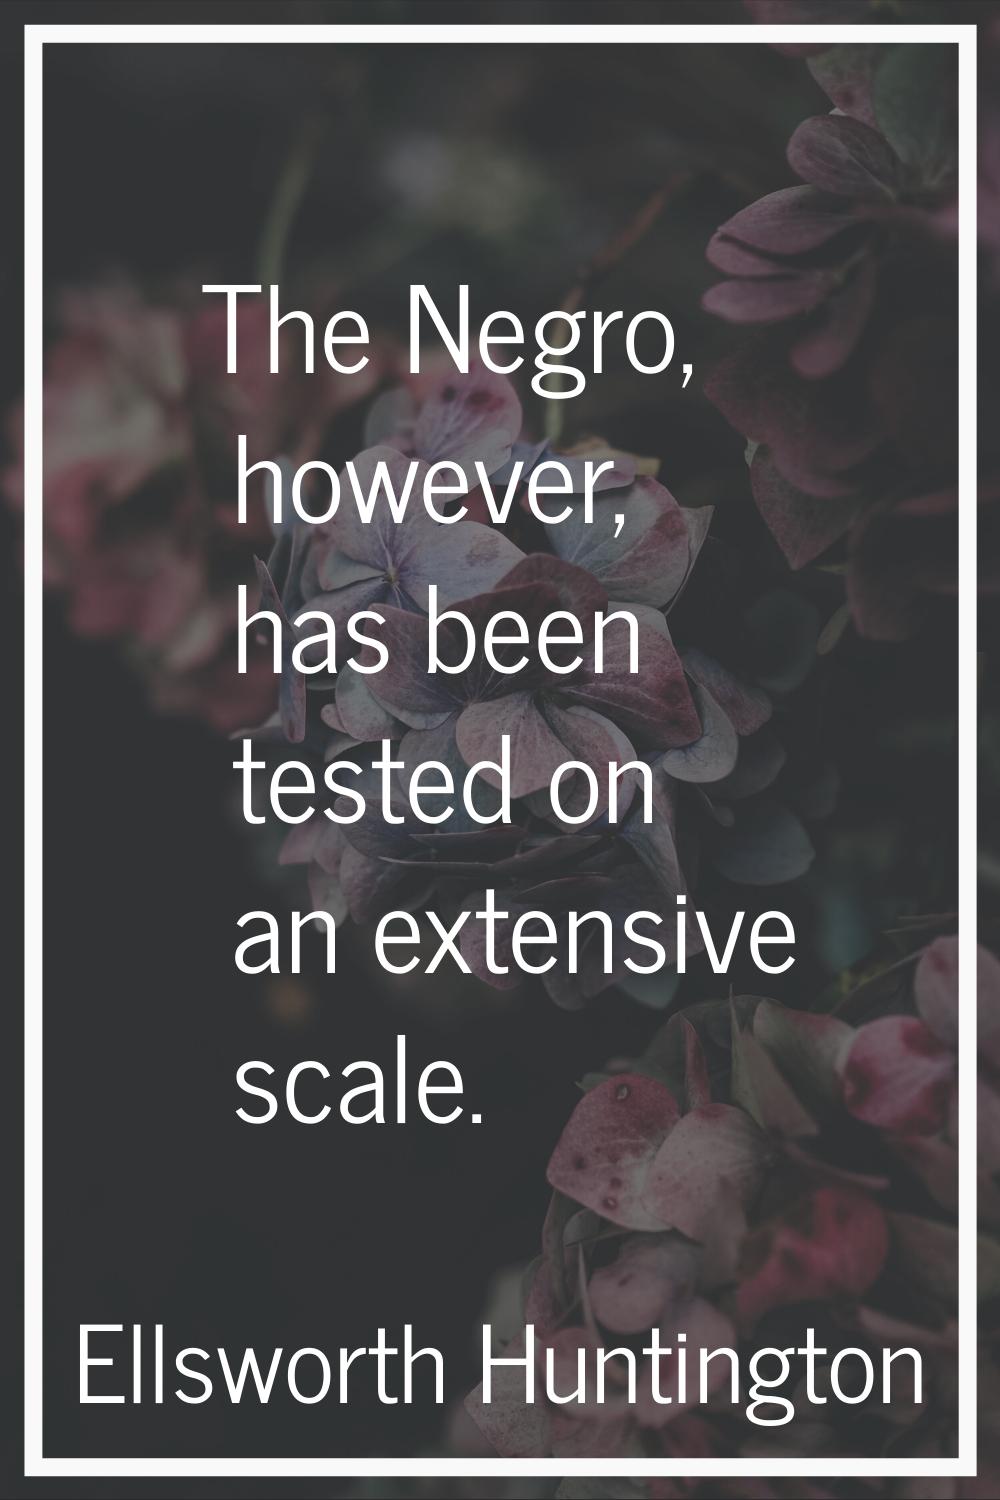 The Negro, however, has been tested on an extensive scale.